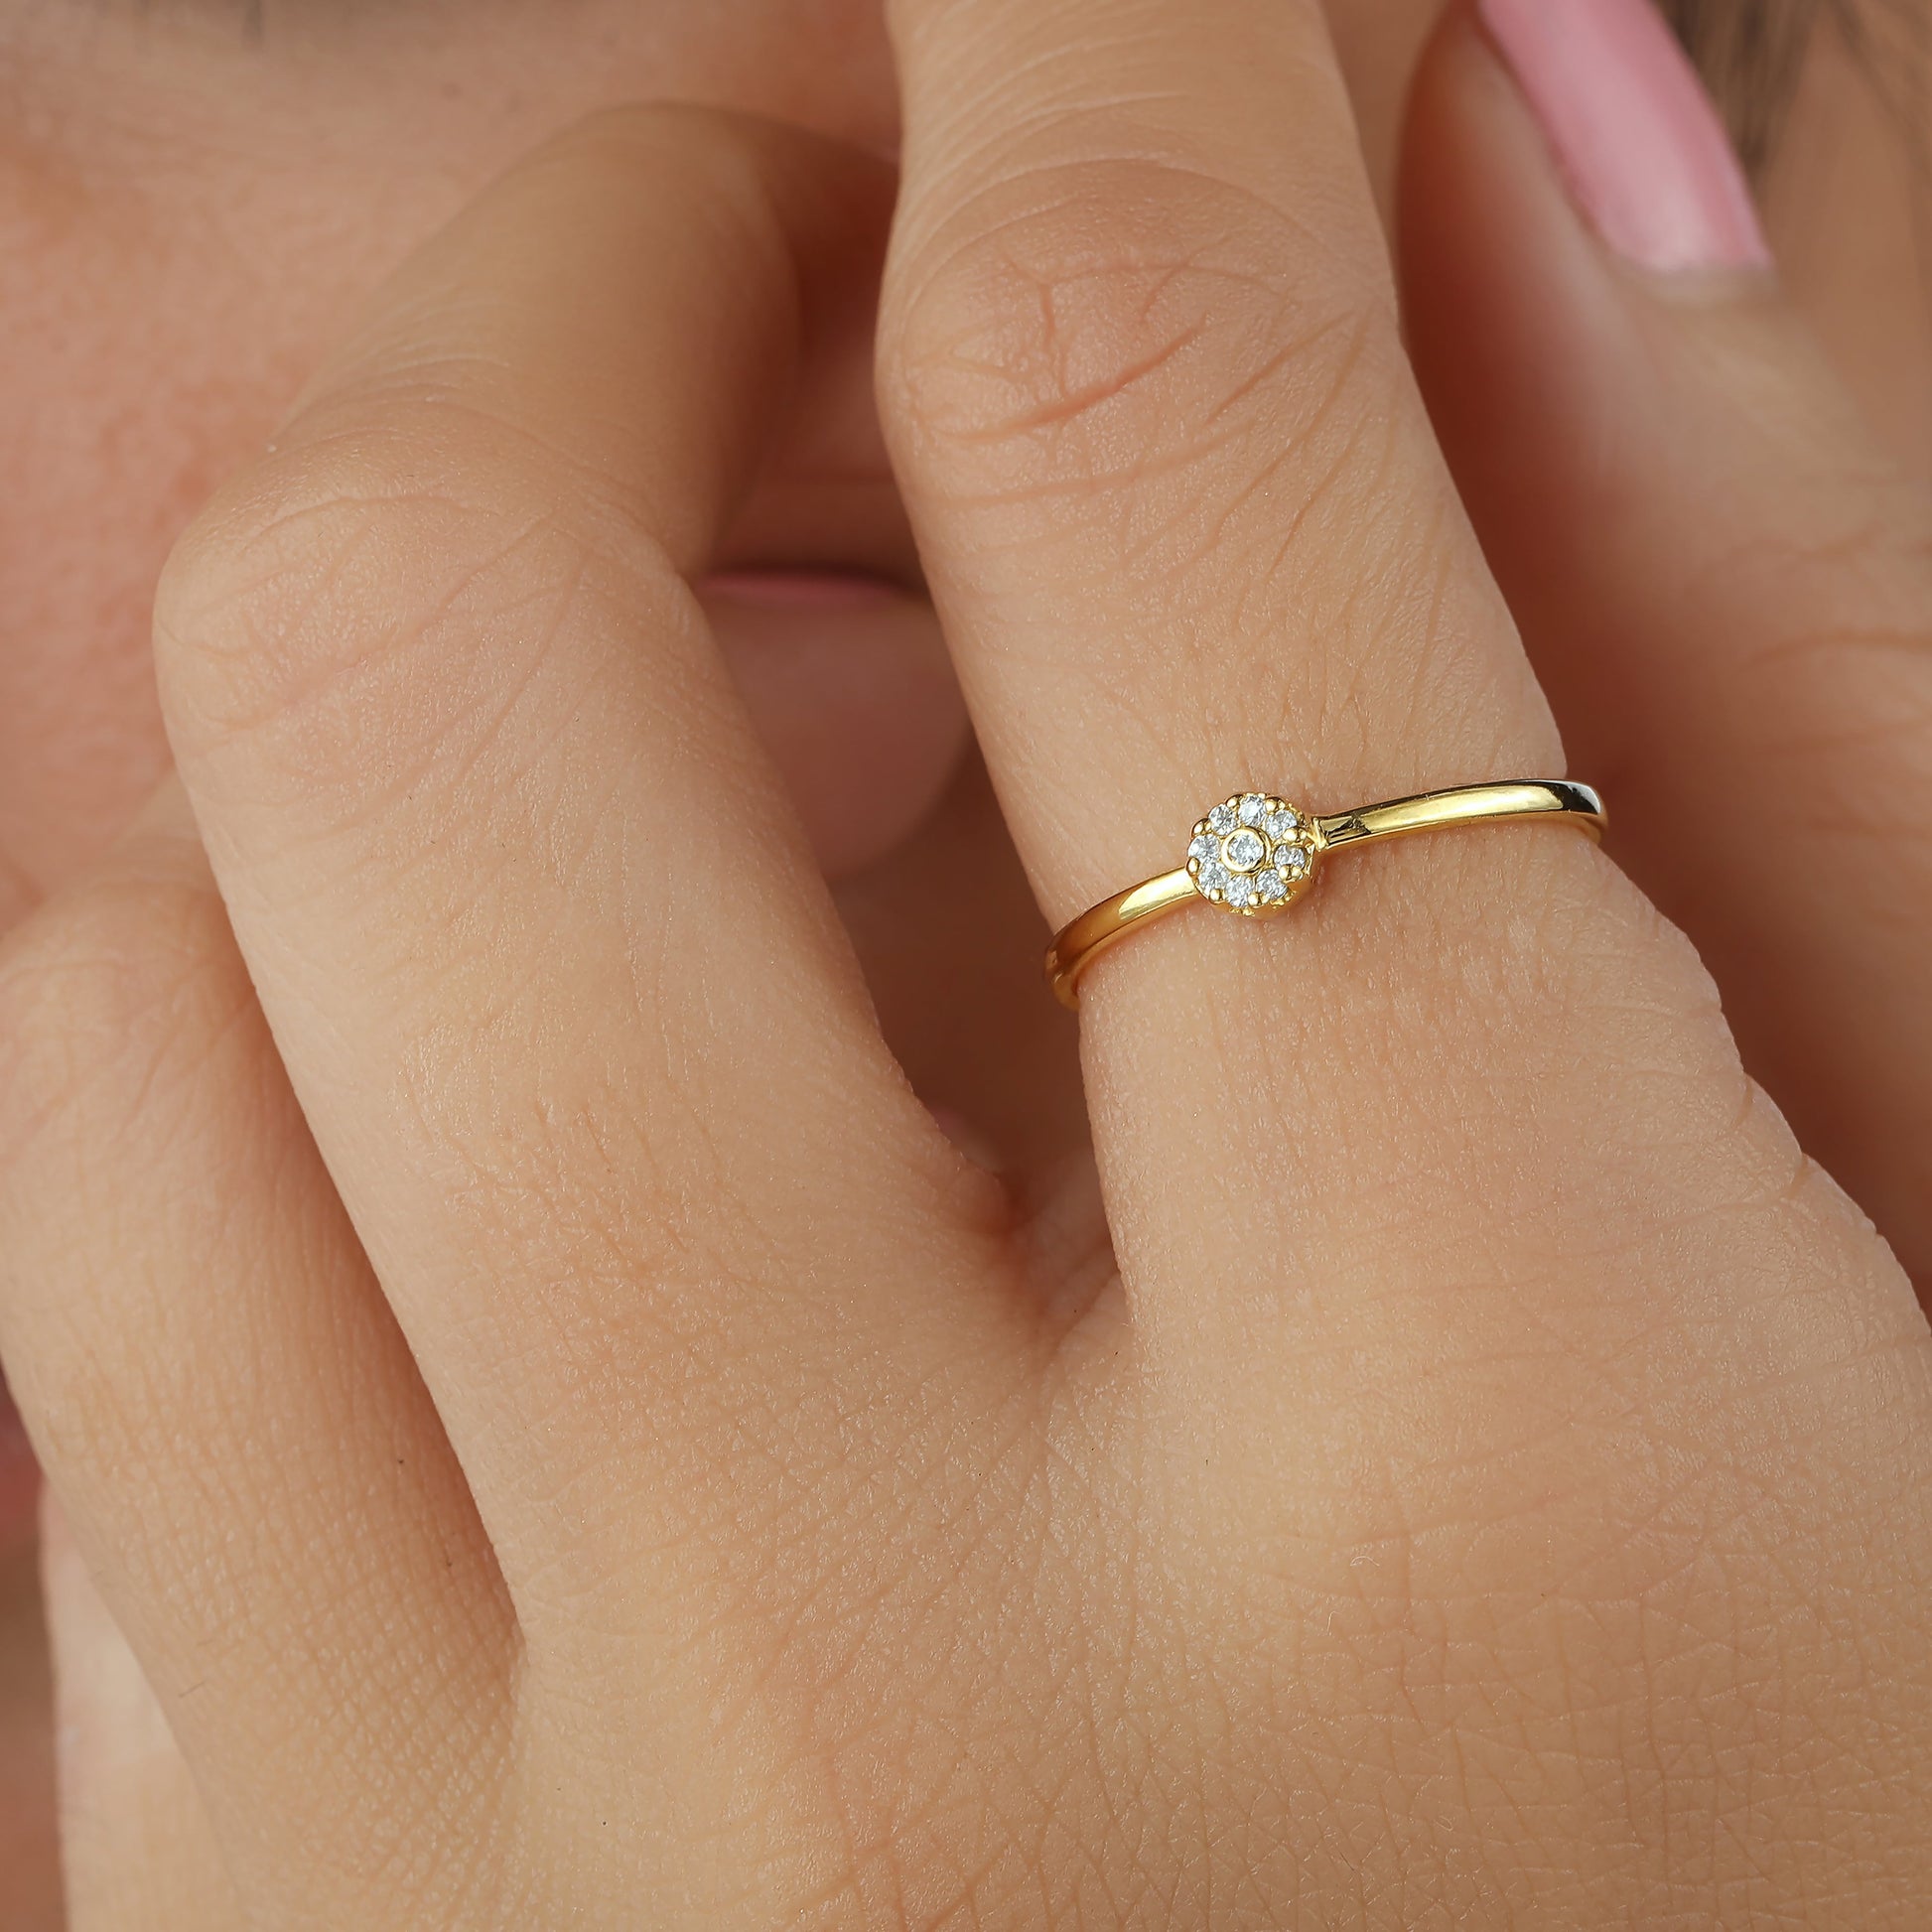 a women wearing promise ring